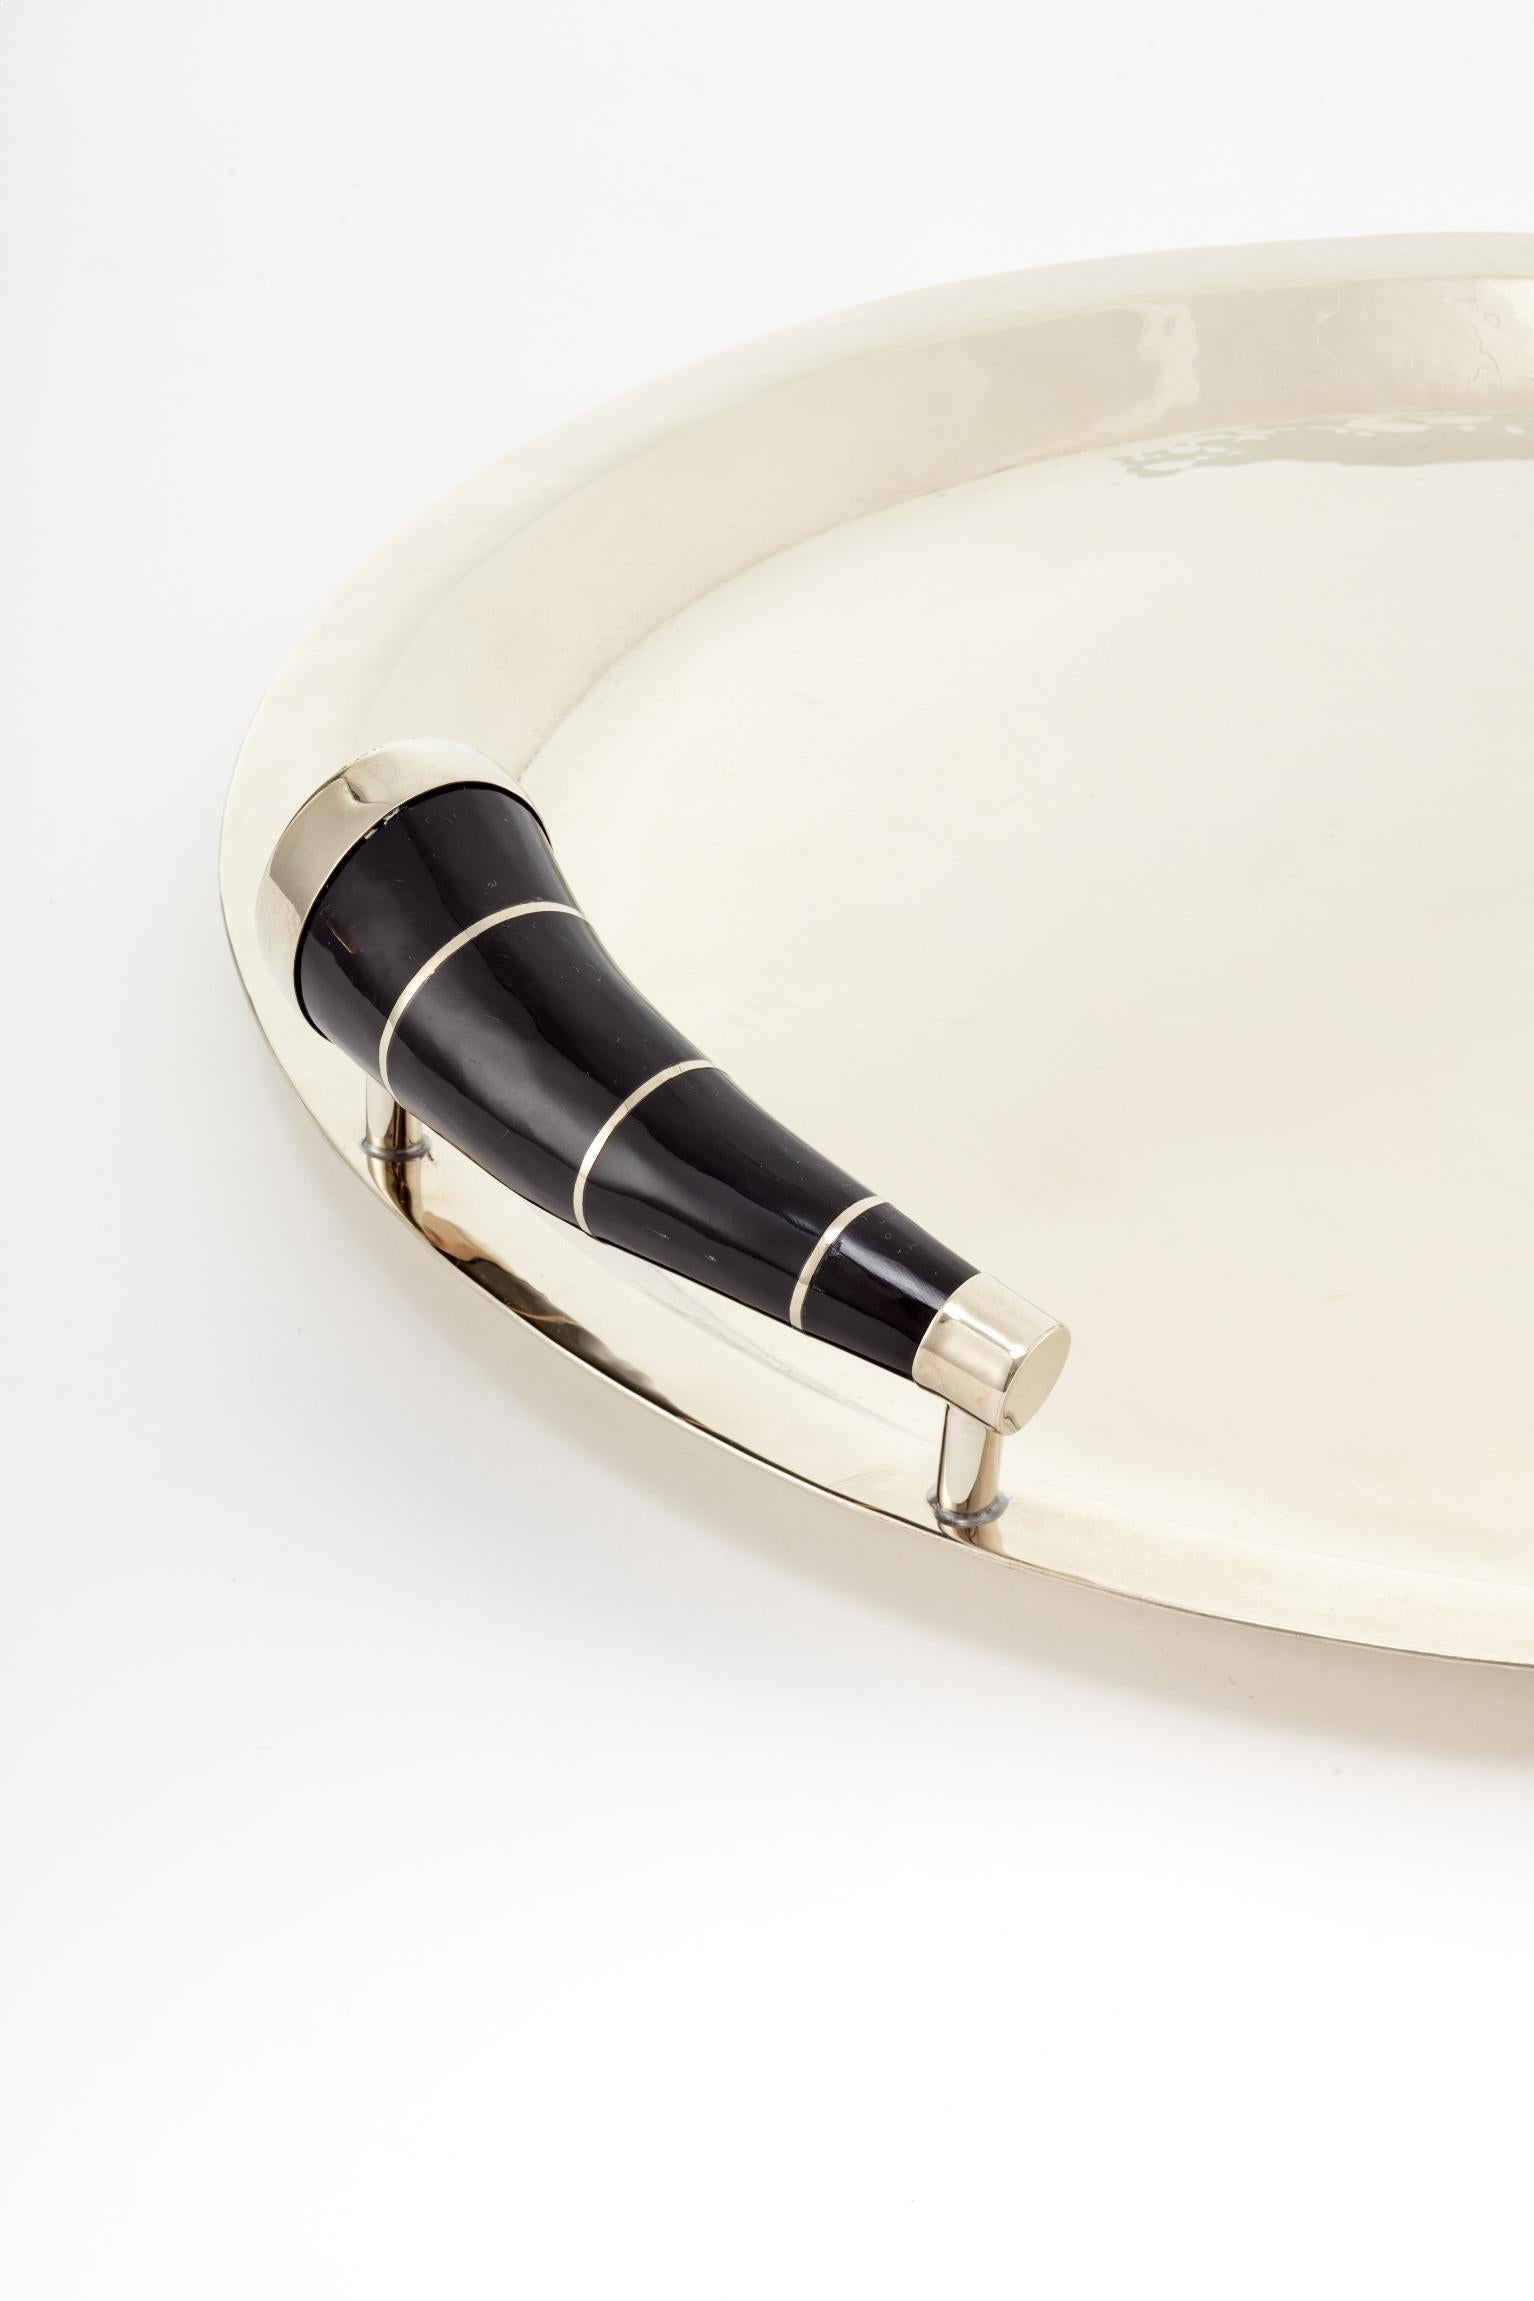 Organic Modern Chubut Large Round Tray, Alpaca Silver & Black Horn For Sale